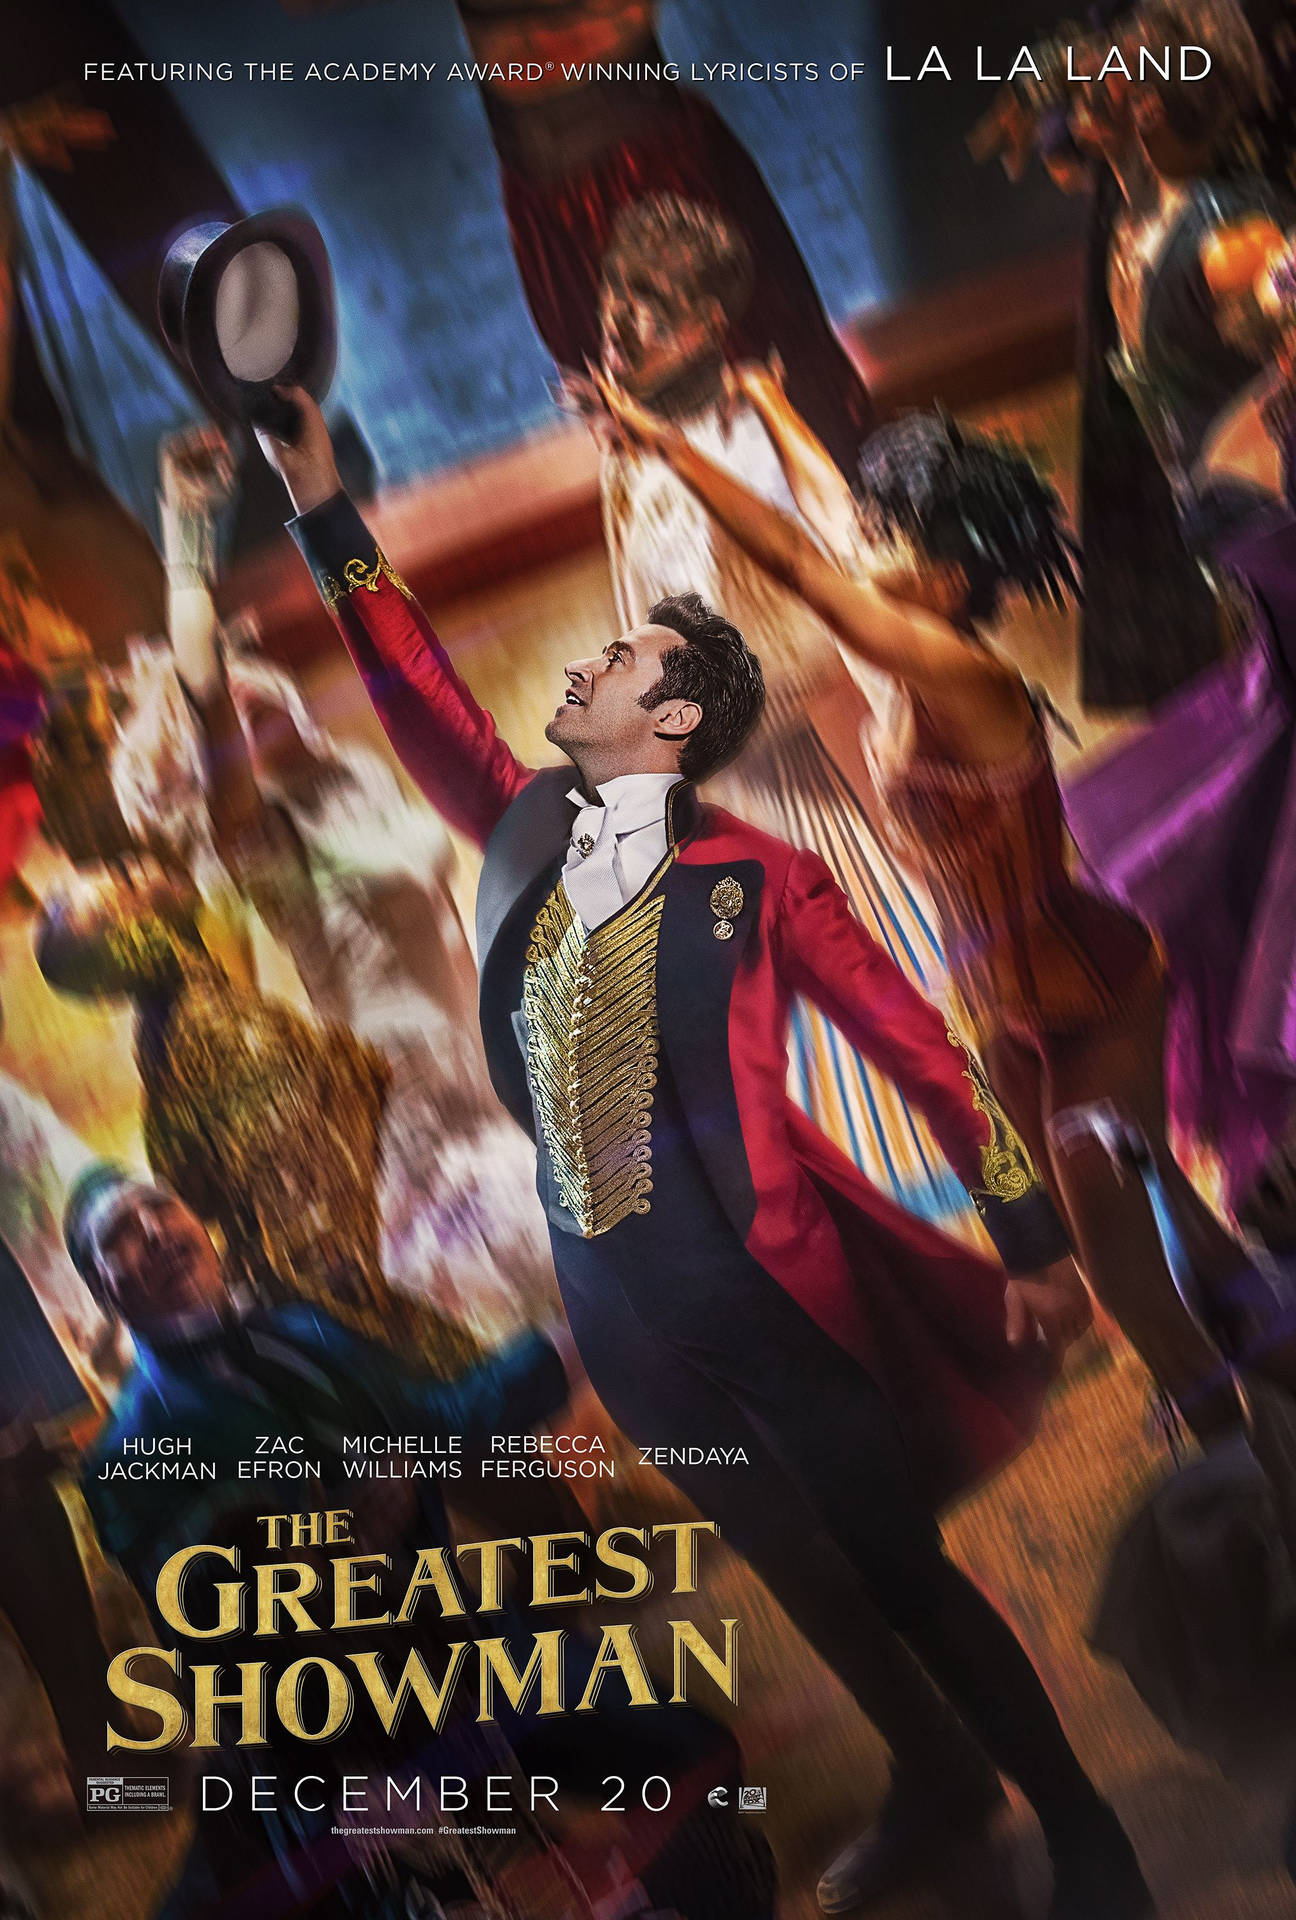 Painted Art Of The Greatest Showman Background